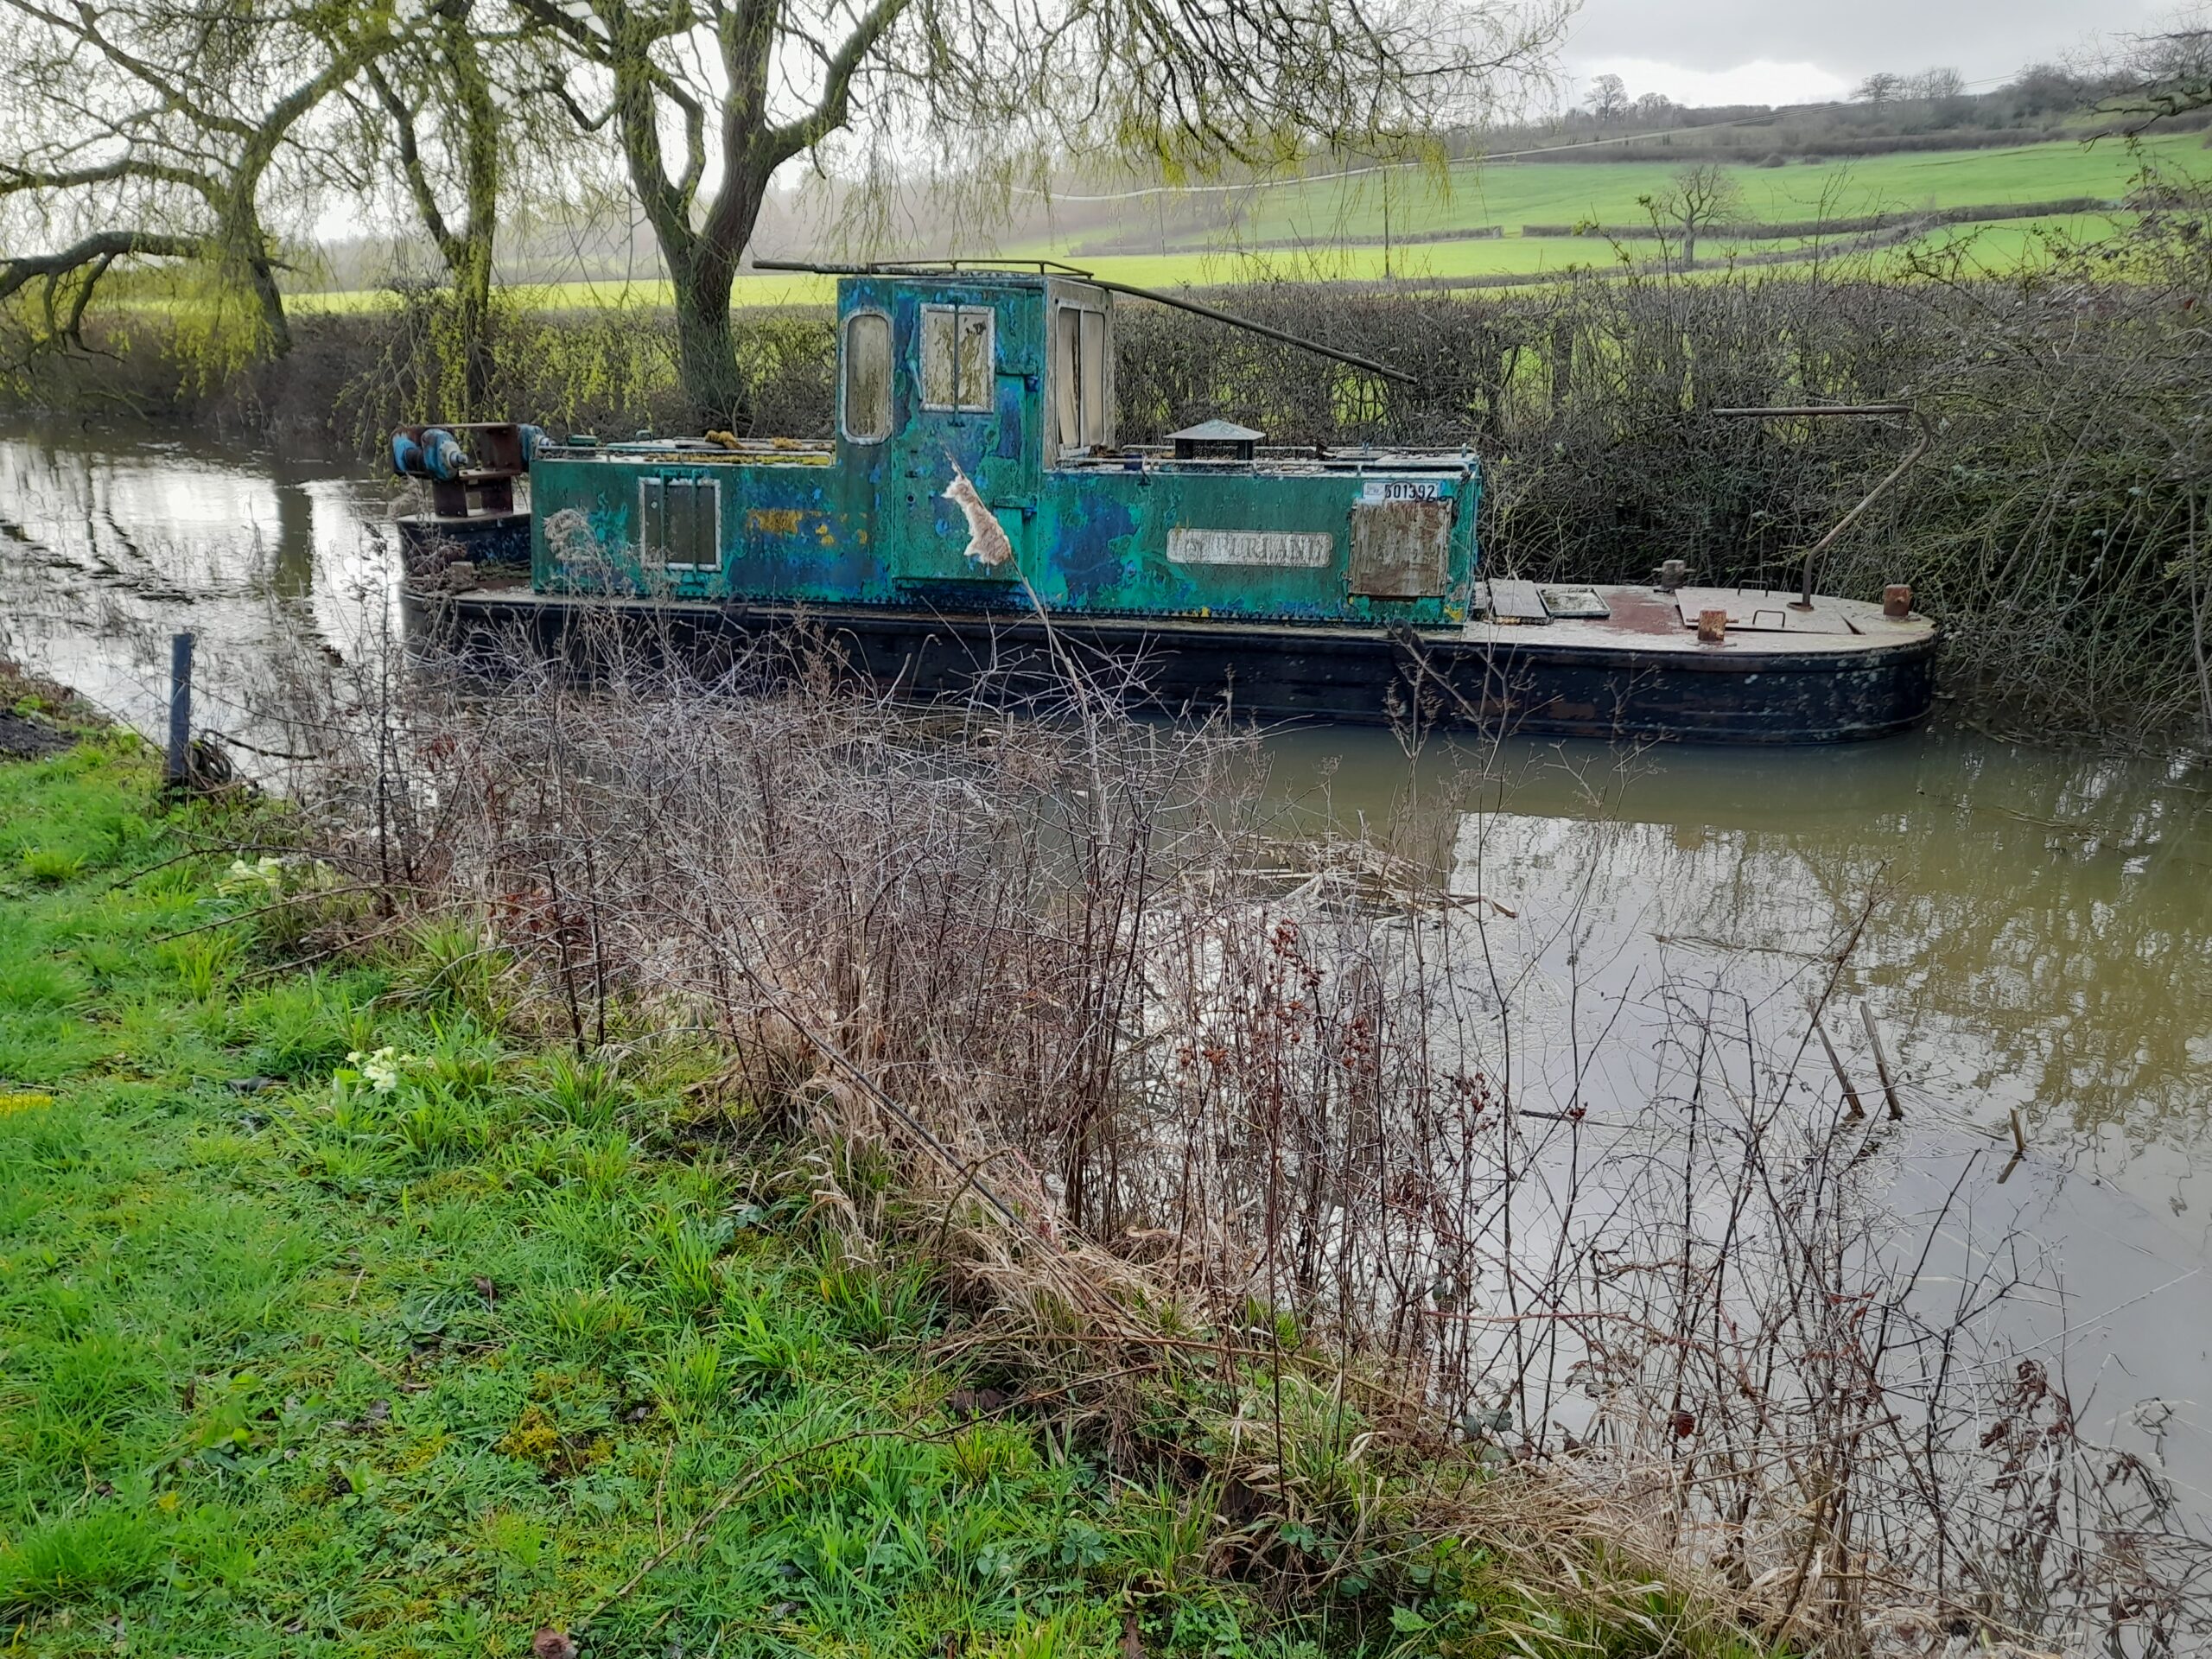 Rachael’s tug boat in the canal at Dauntsey Lock